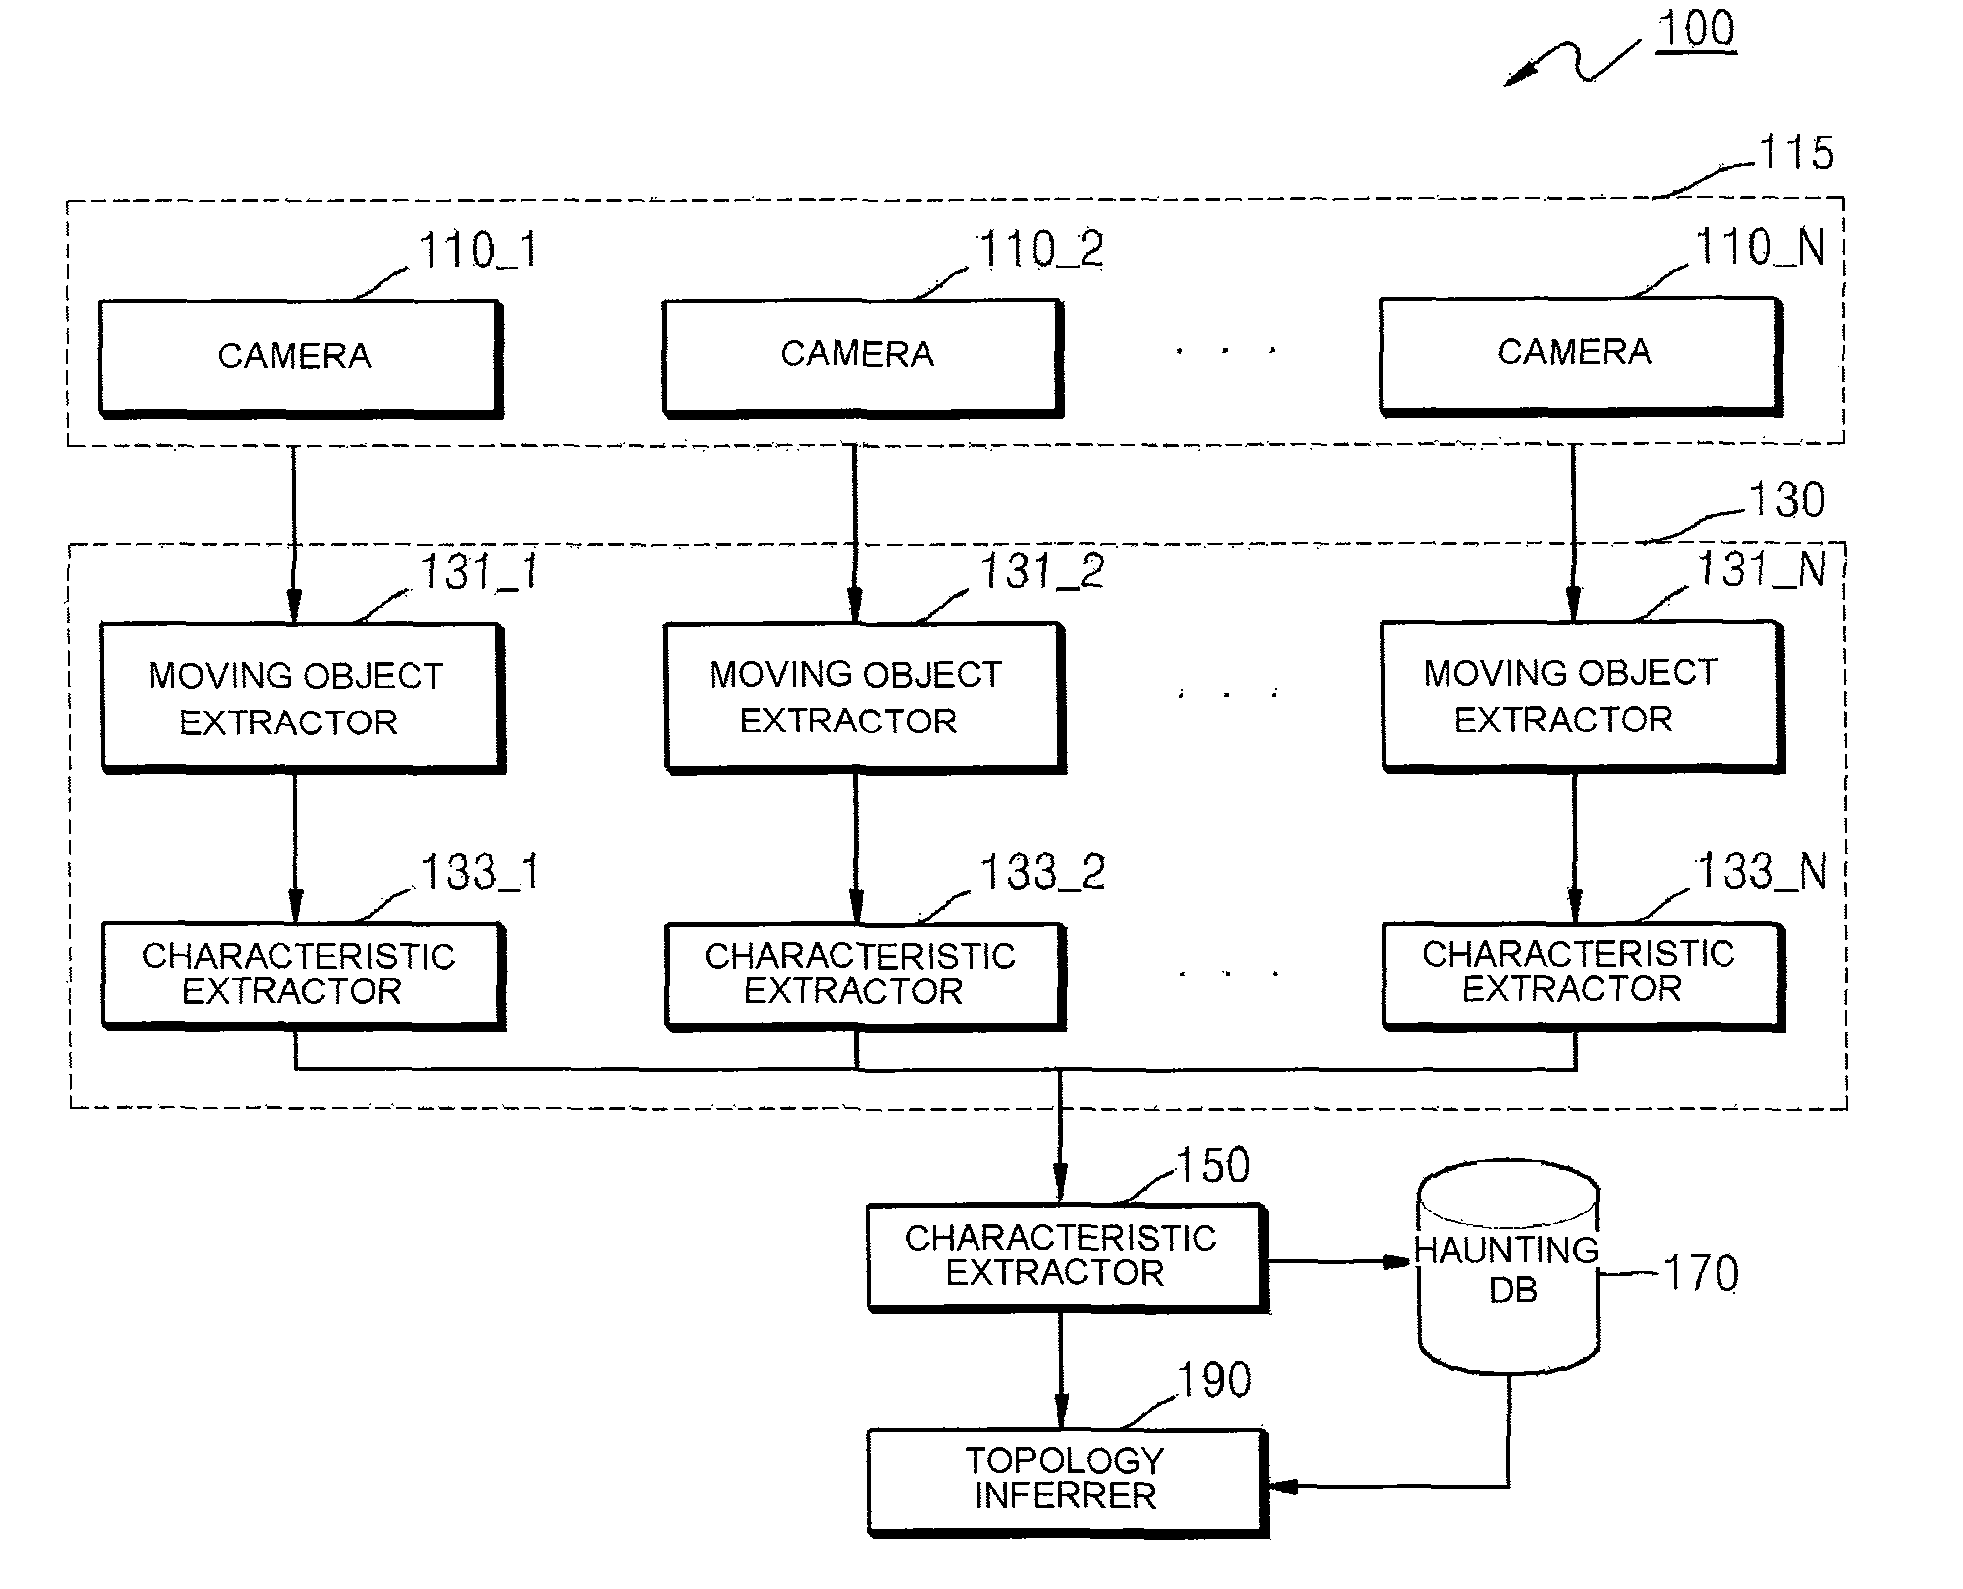 Apparatus and method for inferencing topology of multiple cameras network by tracking movement